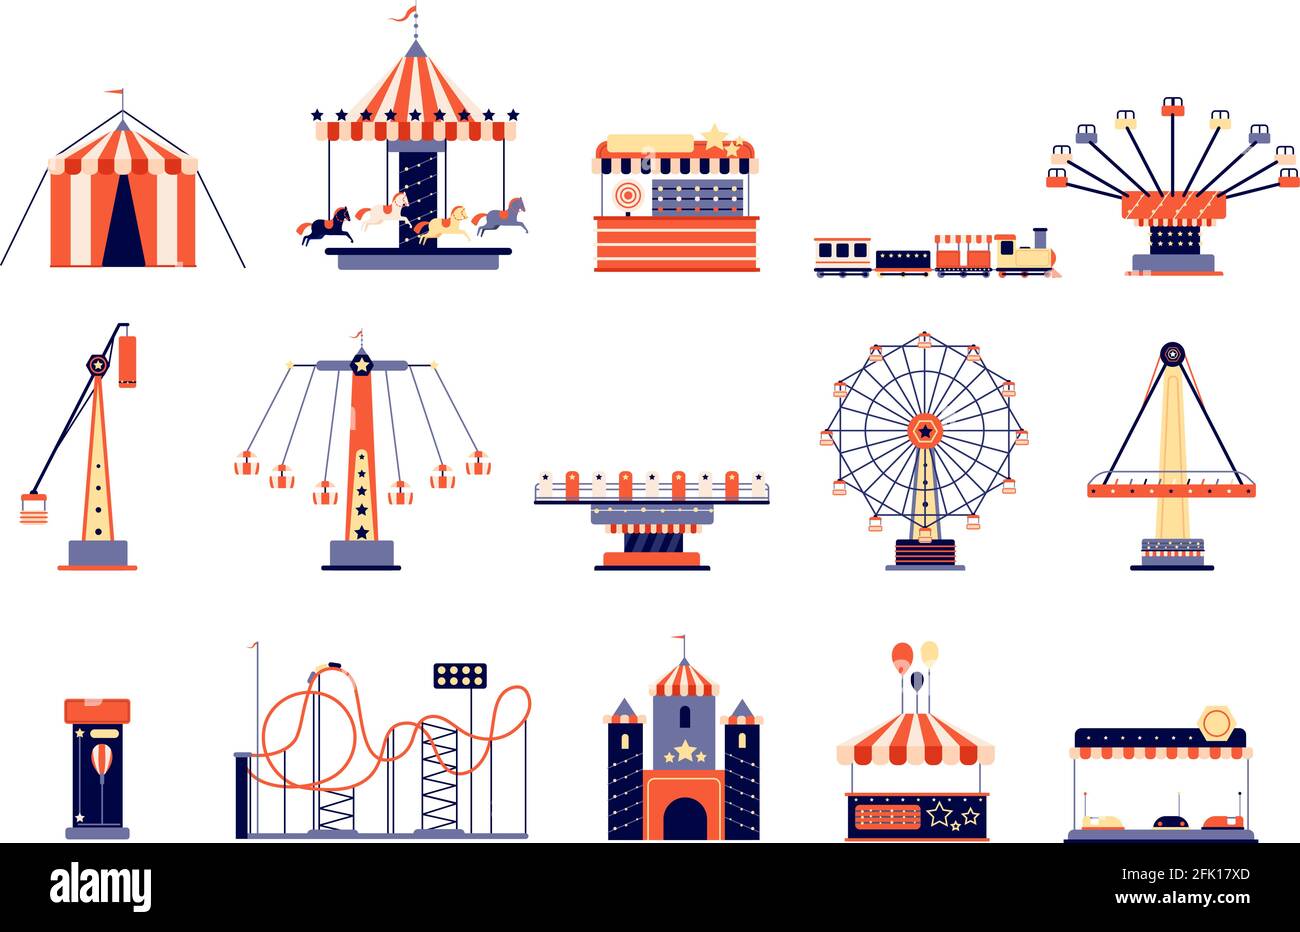 Amusement park. Fun recreation playground, amusements and carousels. Children attractions, rollercoaster and ferris wheel. Fair vector set Stock Vector